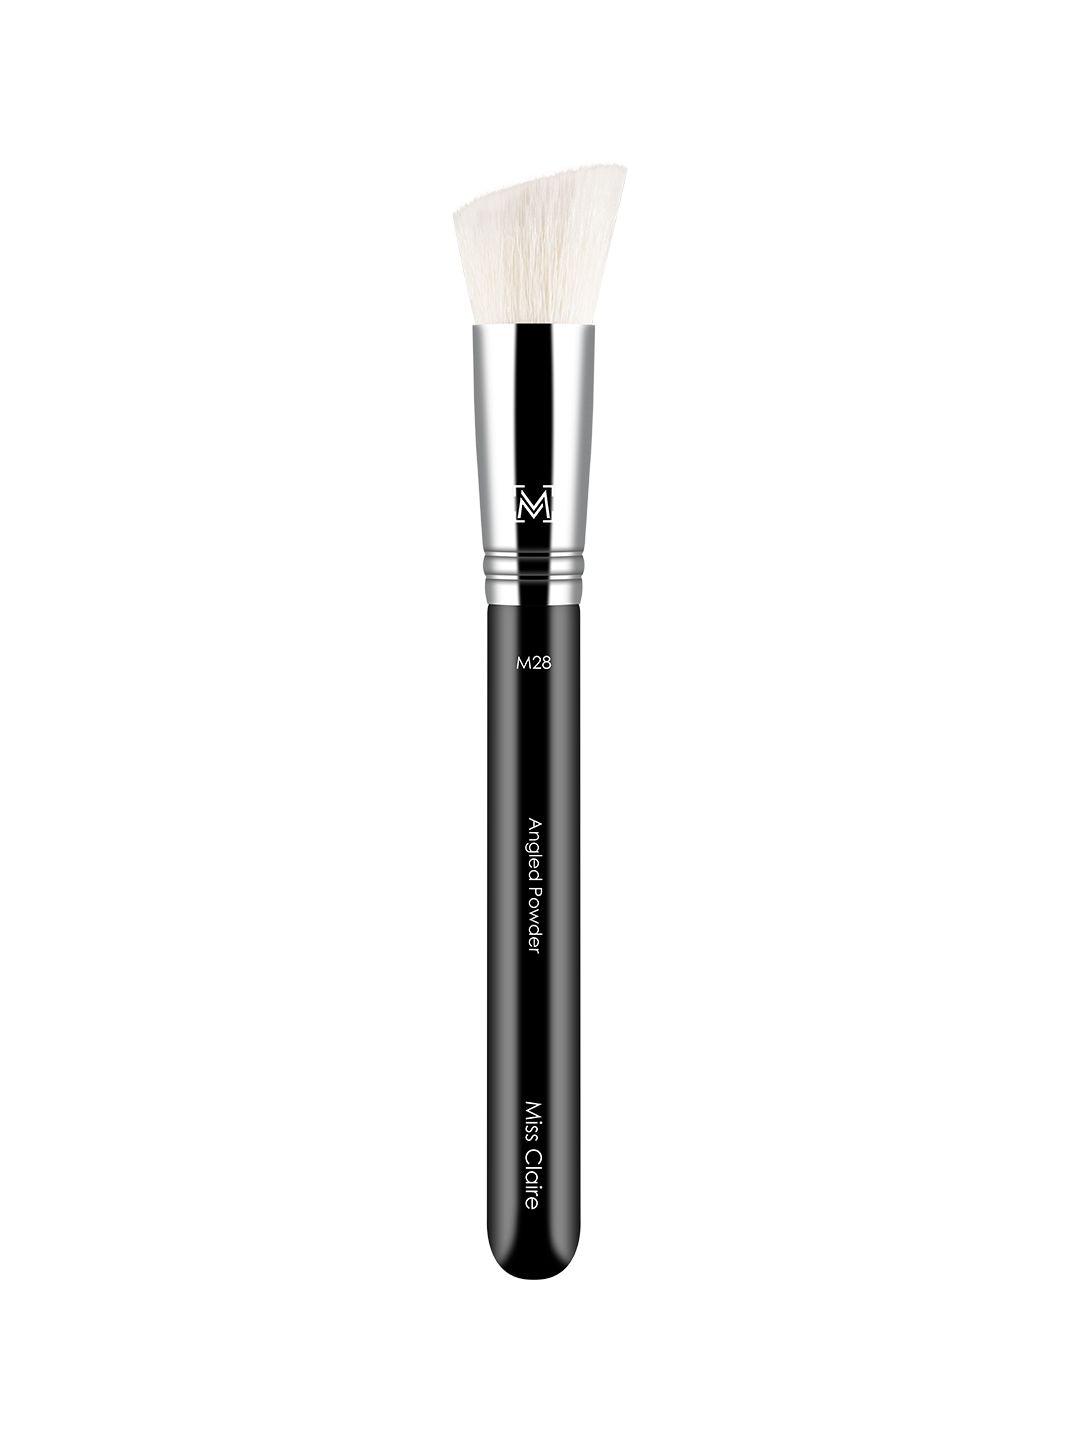 miss claire chrome angled powder brush - m28 black & silver-toned